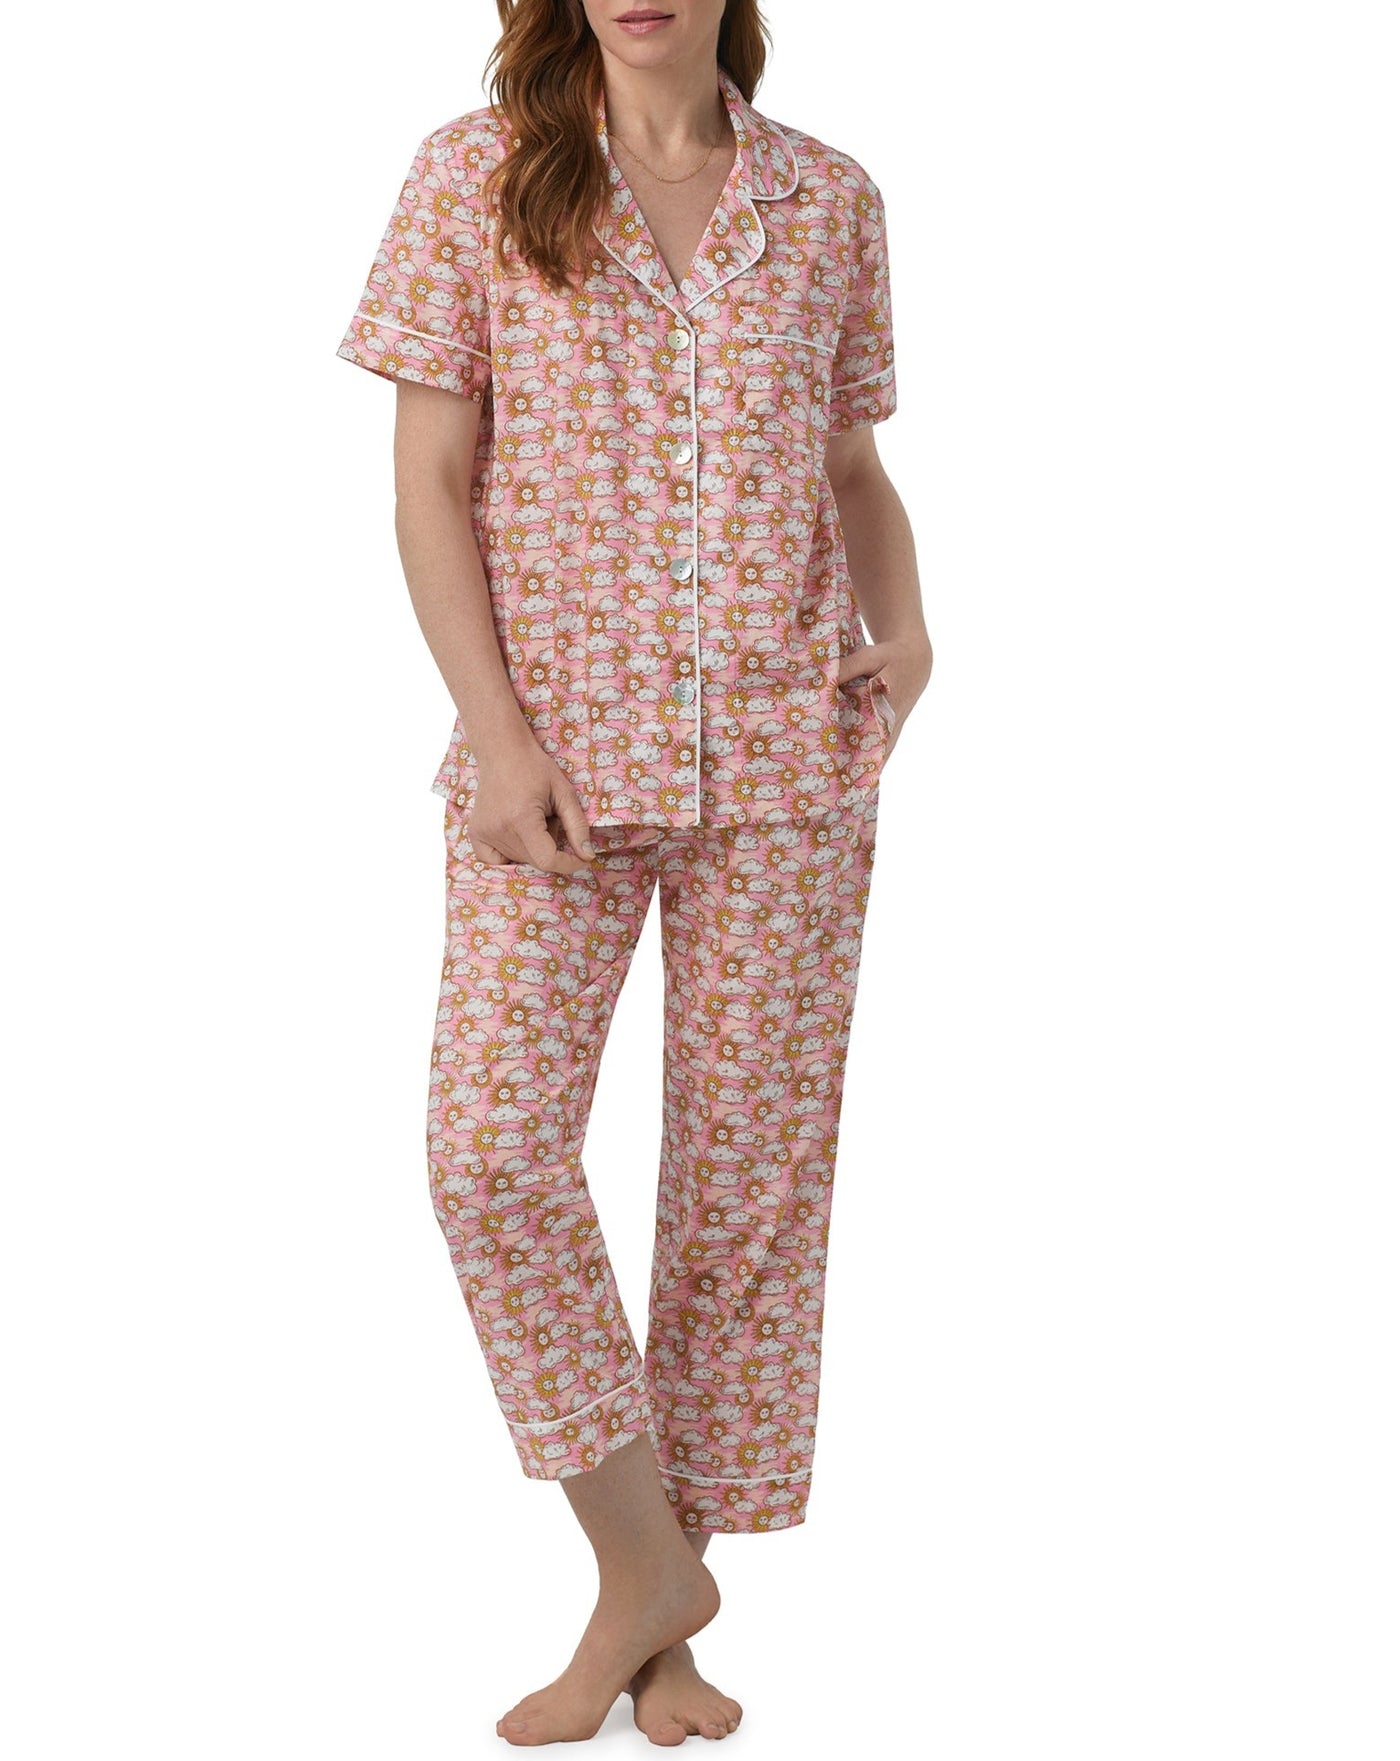 Follow The Sun Cropped Cotton PJ Set Made With Liberty Fabric - Beestung Lingerie